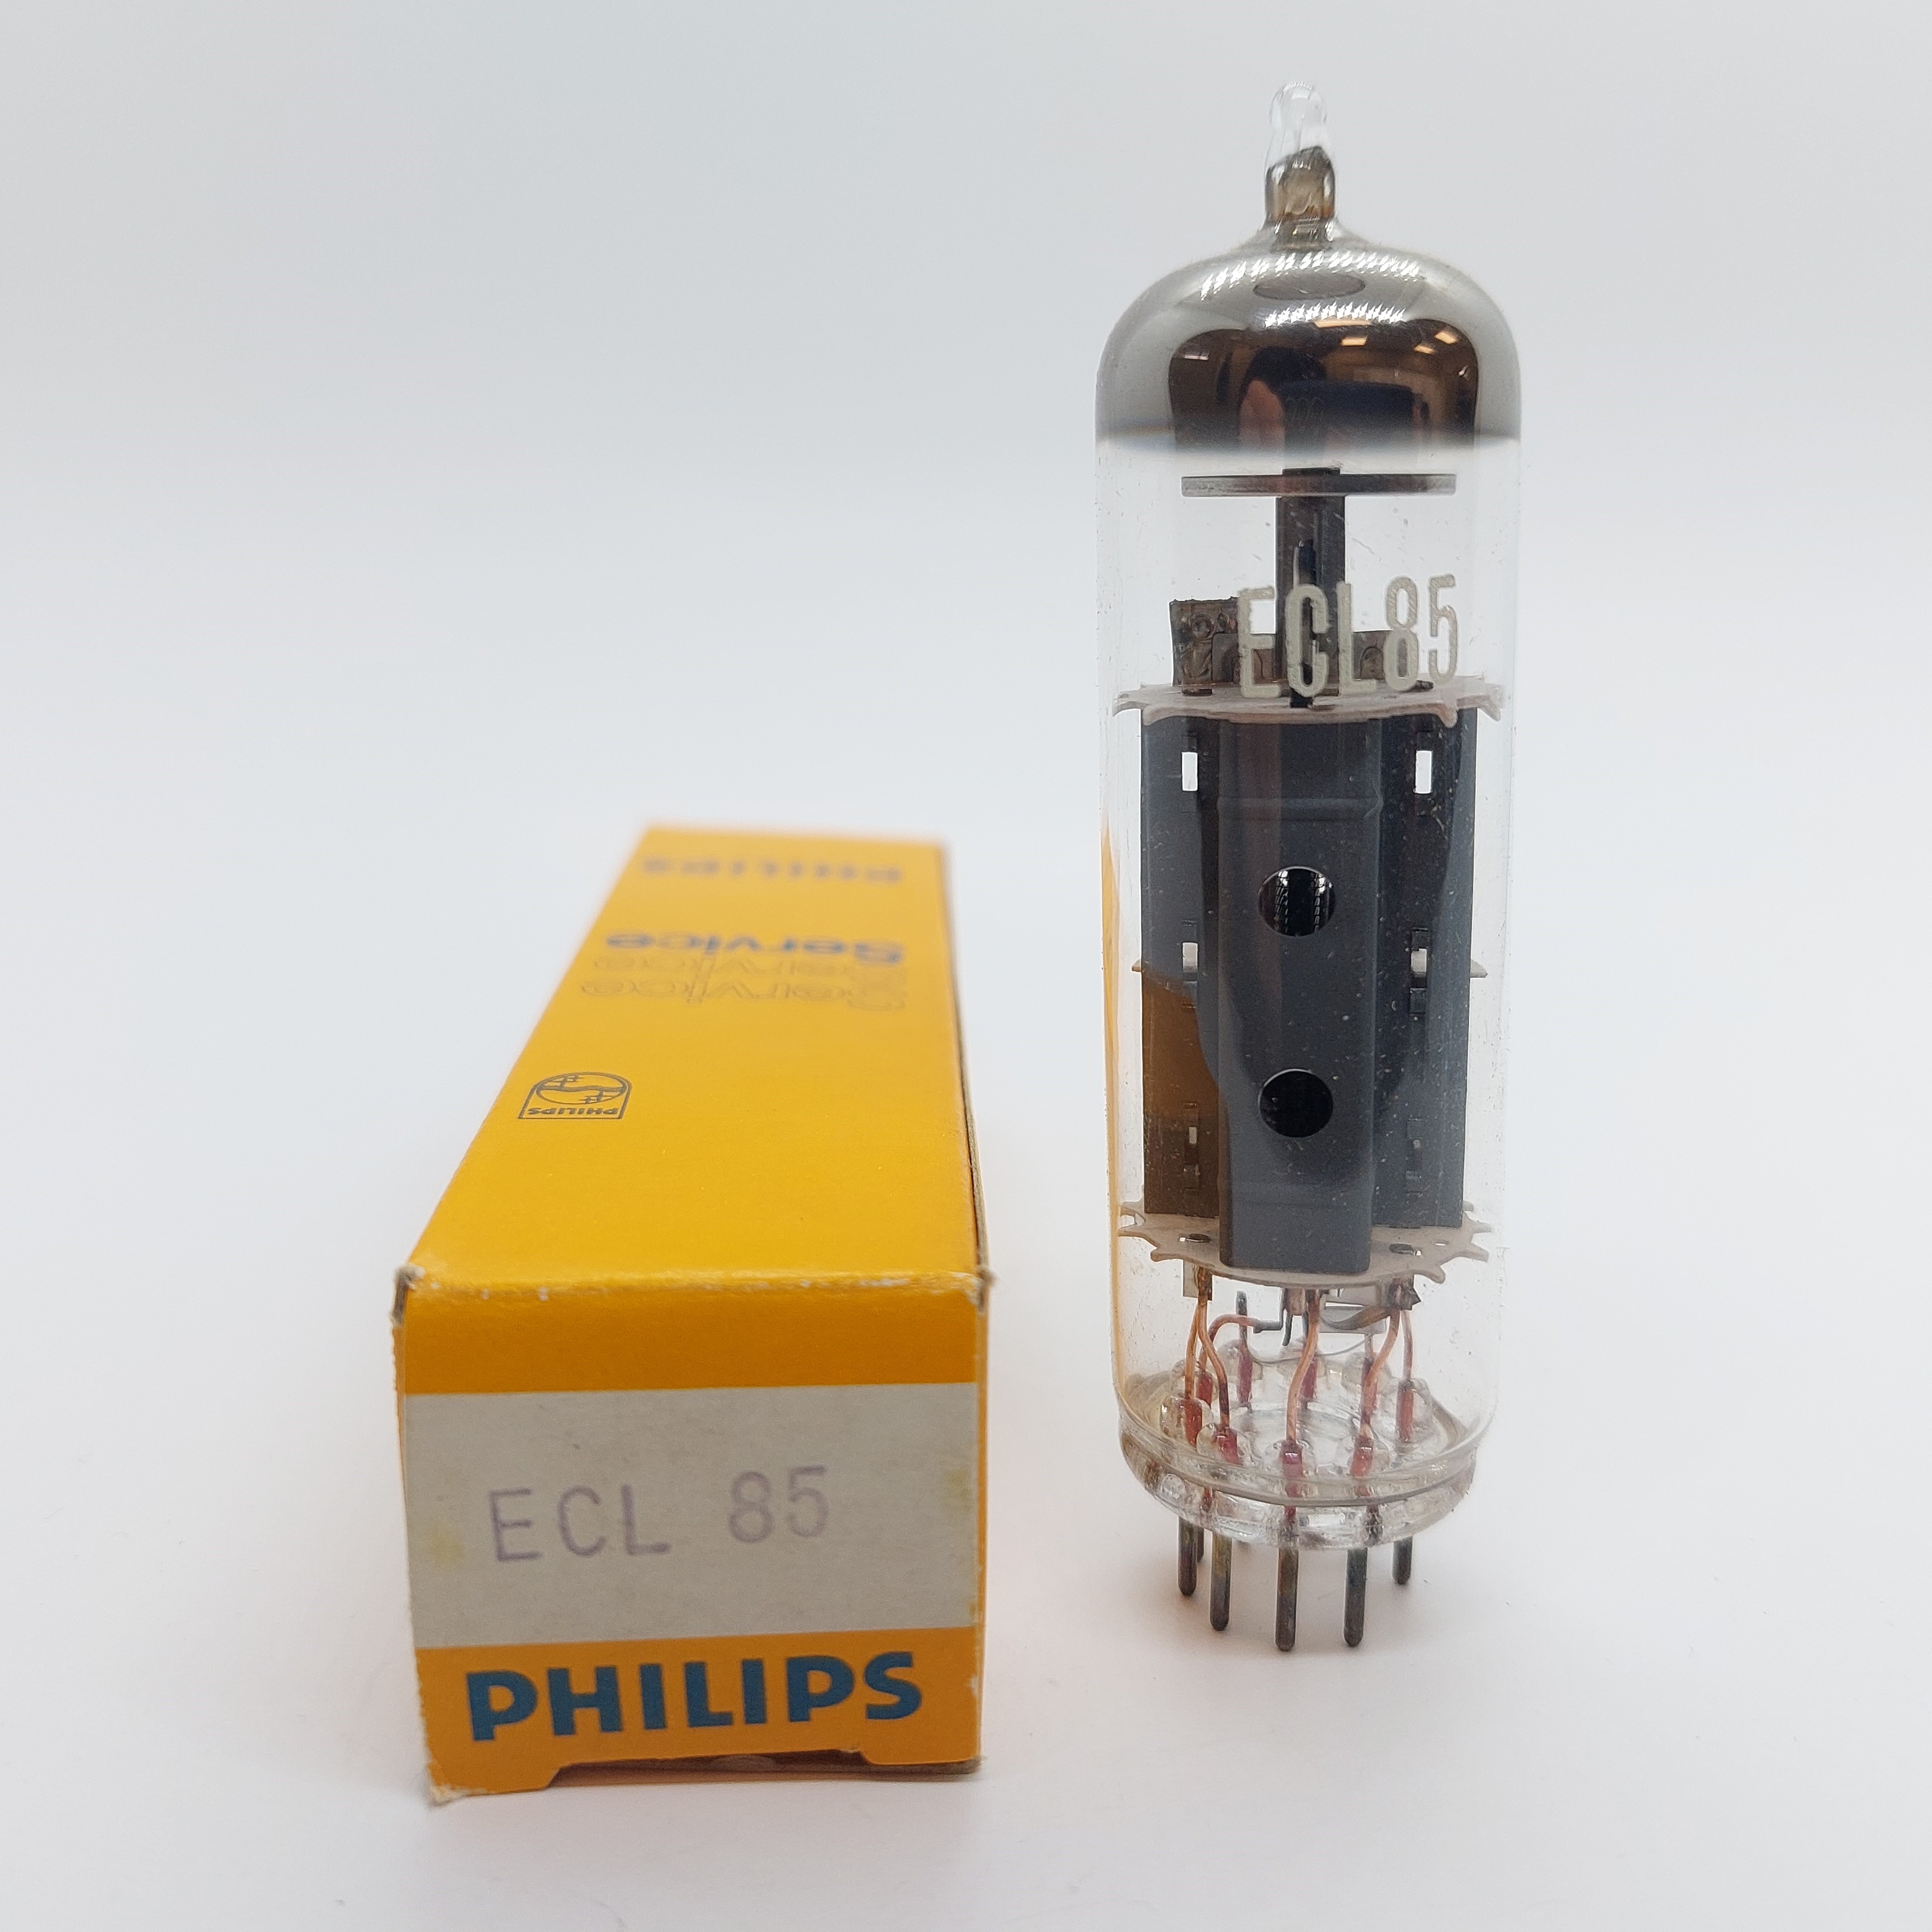 ECL85 PHILIPS NOS BOXED VALVE TUBE